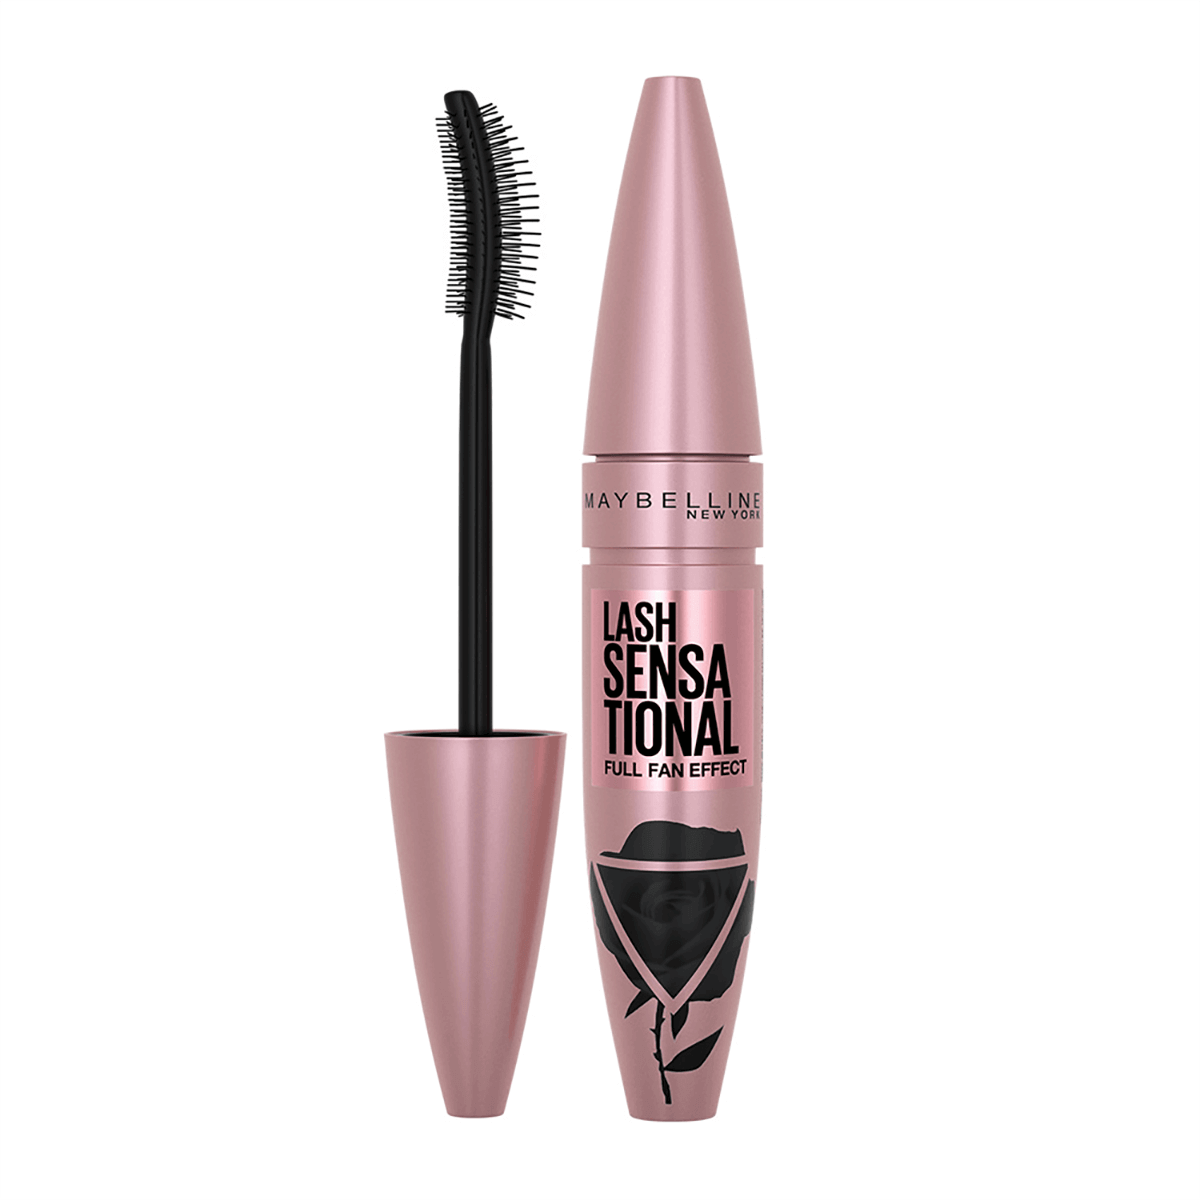 Discover an icon. This black mascara is our first Layer-Reveal brush with 6 lengths of bristles that captures the tiniest lashes you didn't know you had, volumises & defines the look of longer lashes. Result: A Layered, Multiplied Effect. Low wax formula for intense blackness without sticking lashes together. Reveals layers & layers of lashes. Gives a multiplied lash look . Volumises every layer of lashes. Layer-reveal brush captures even the tiniest of lashes. Black mascara for longer, thicker lashes. More volume, more intensity. Shade: Midnight Black